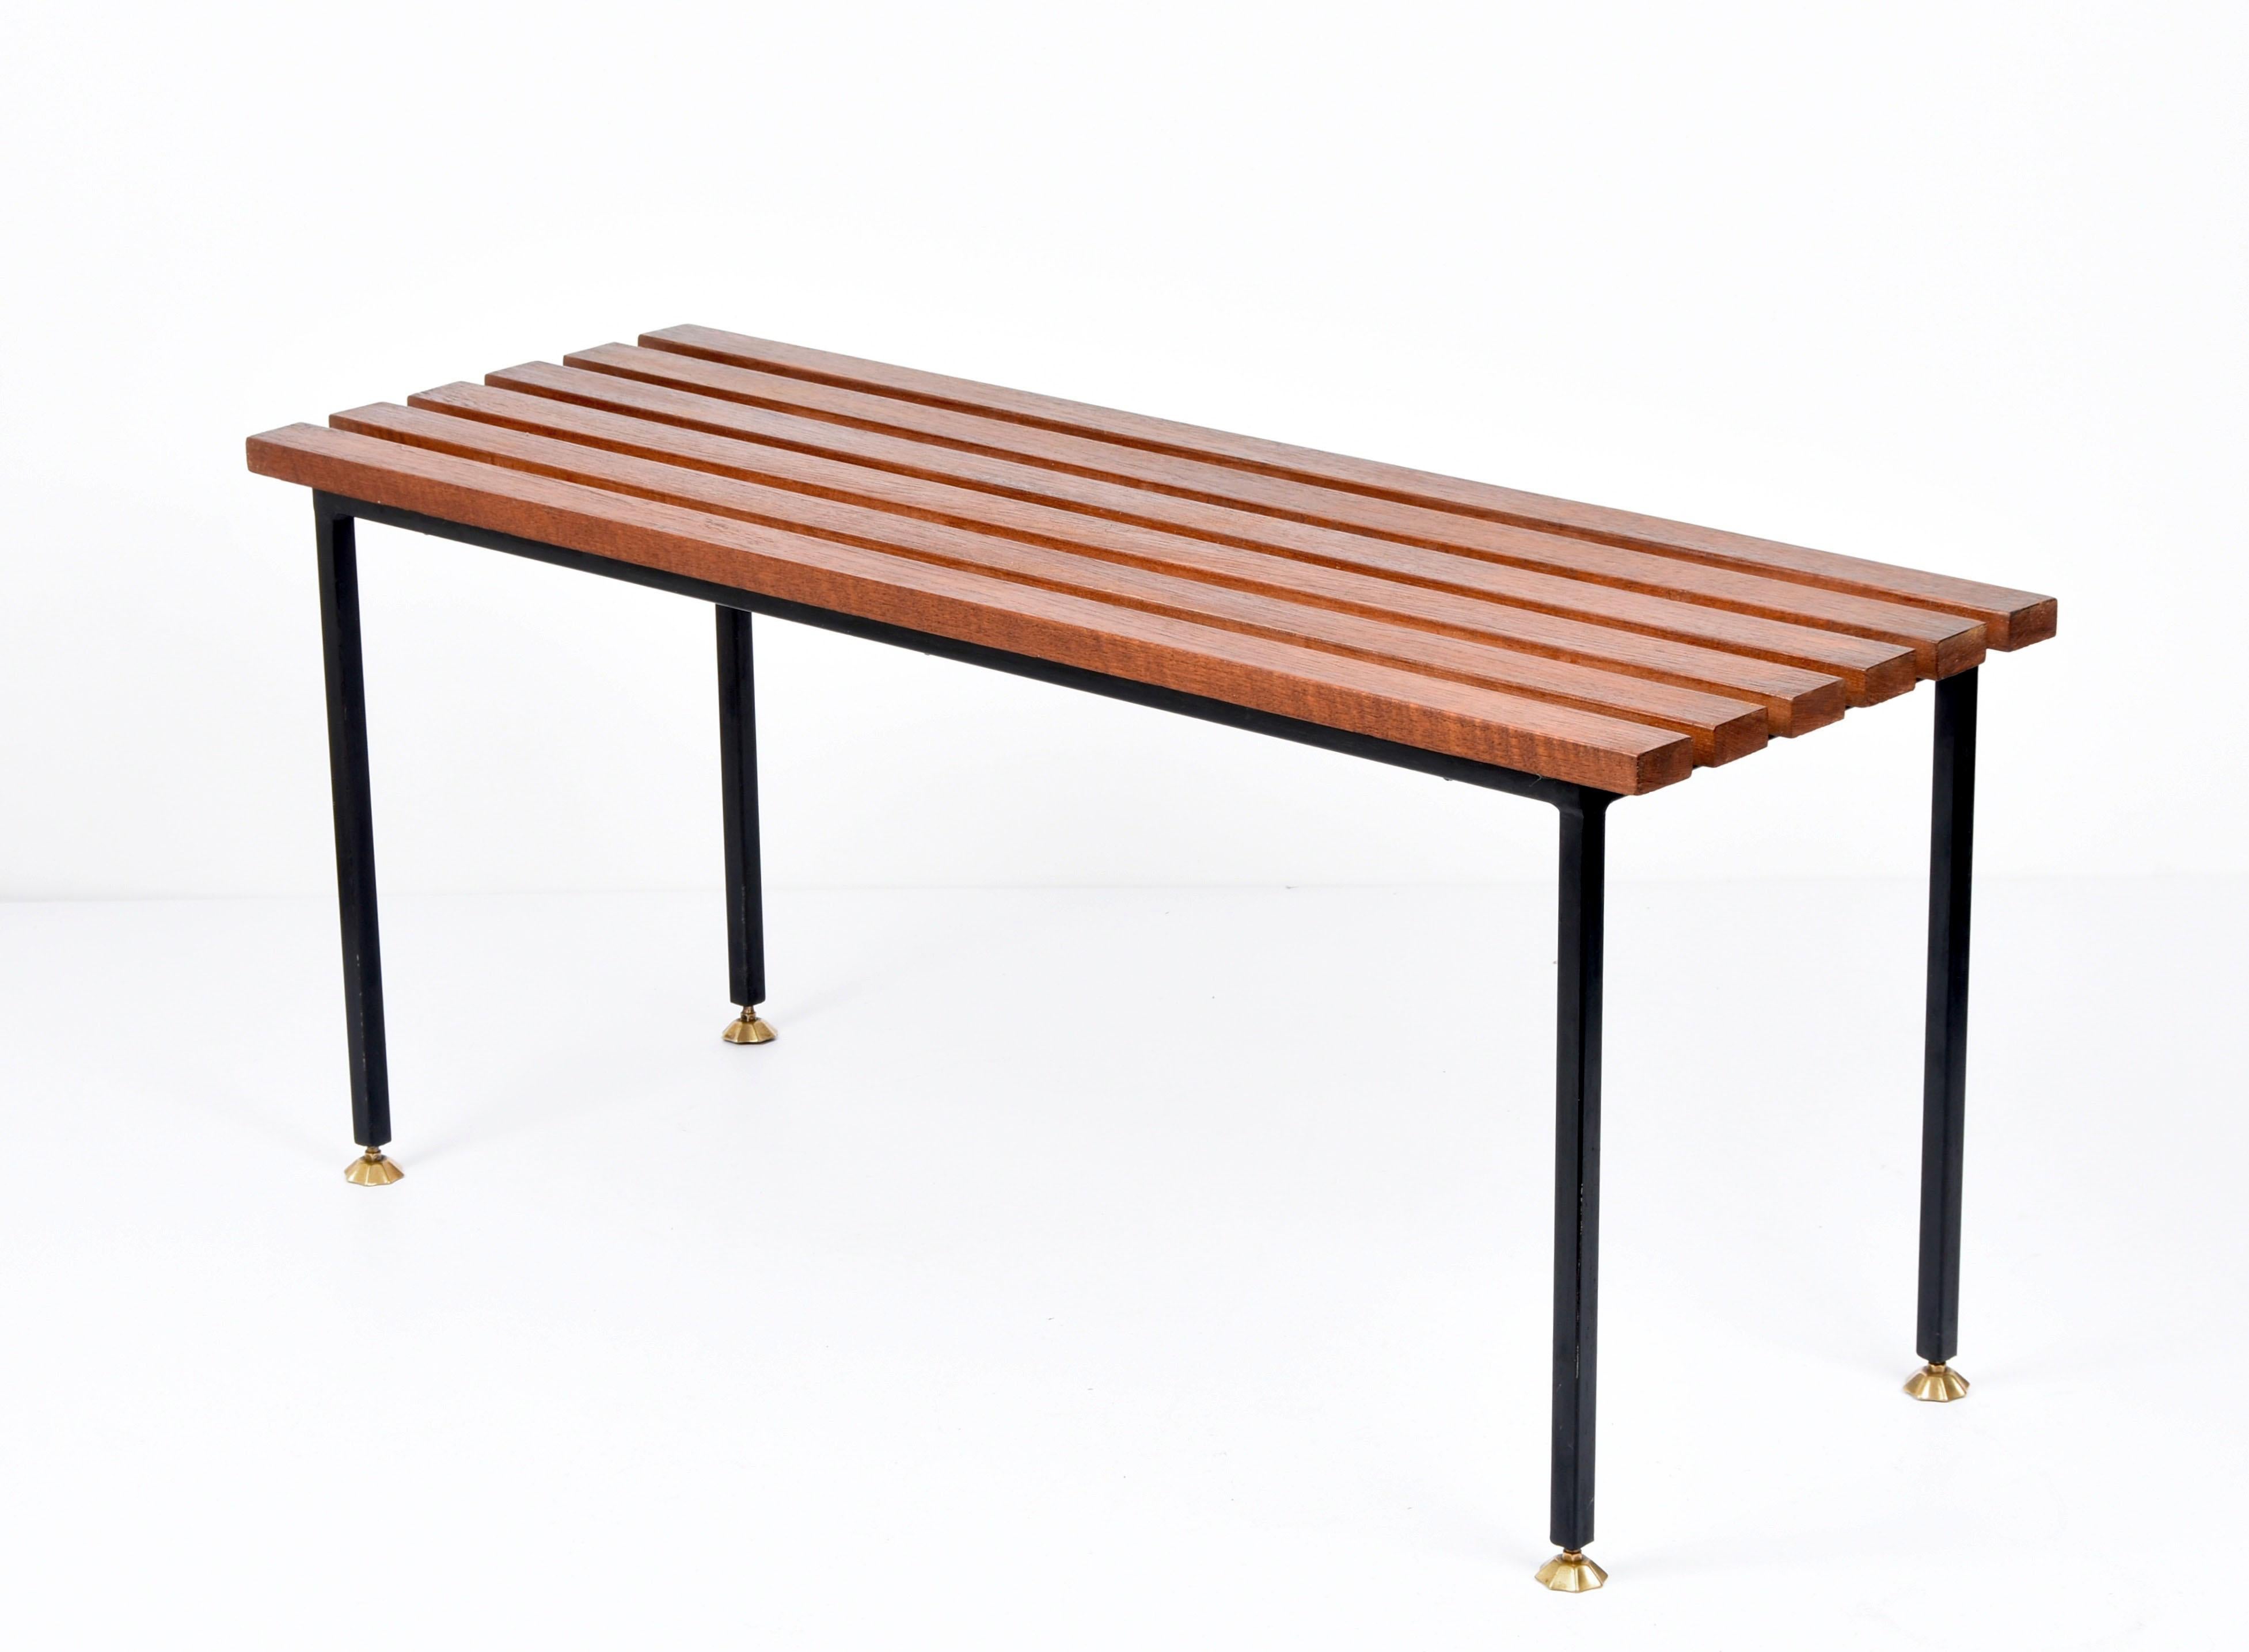 Midcentury Teak and Black Enameled Metal Italian Bench with Brass Feet, 1960s For Sale 5